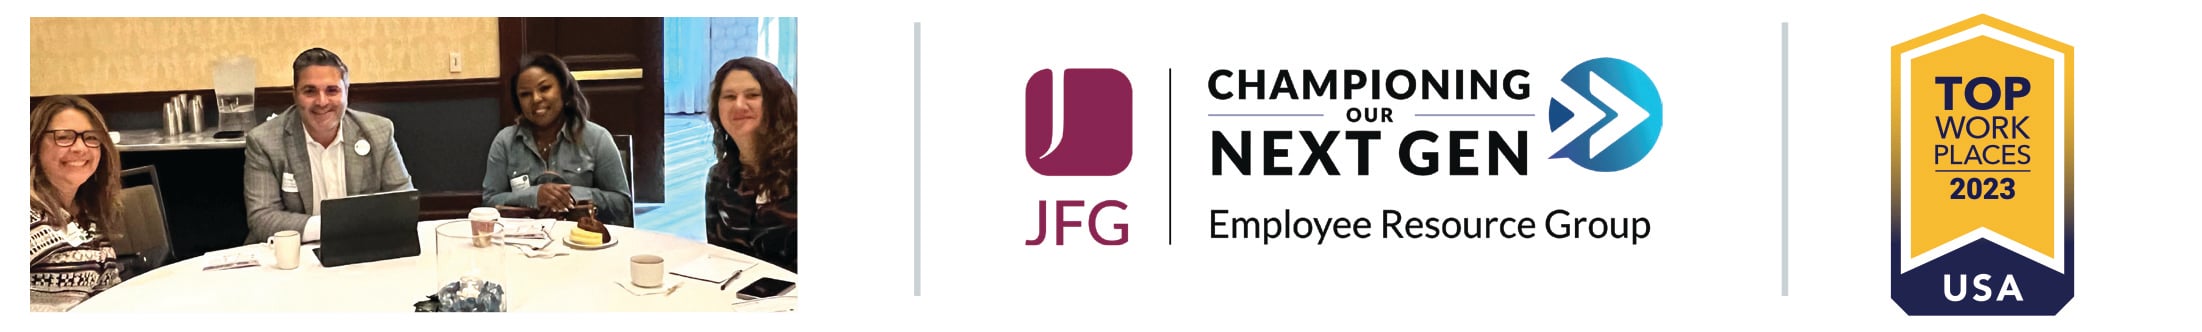 three graphics - the first shows four associates sitting around a round table smiling at the camera. Second photo displays the logo of the JFG championing our Next Generation Employee Resource Group. The third graphic is a Top Work Places 2023 award.